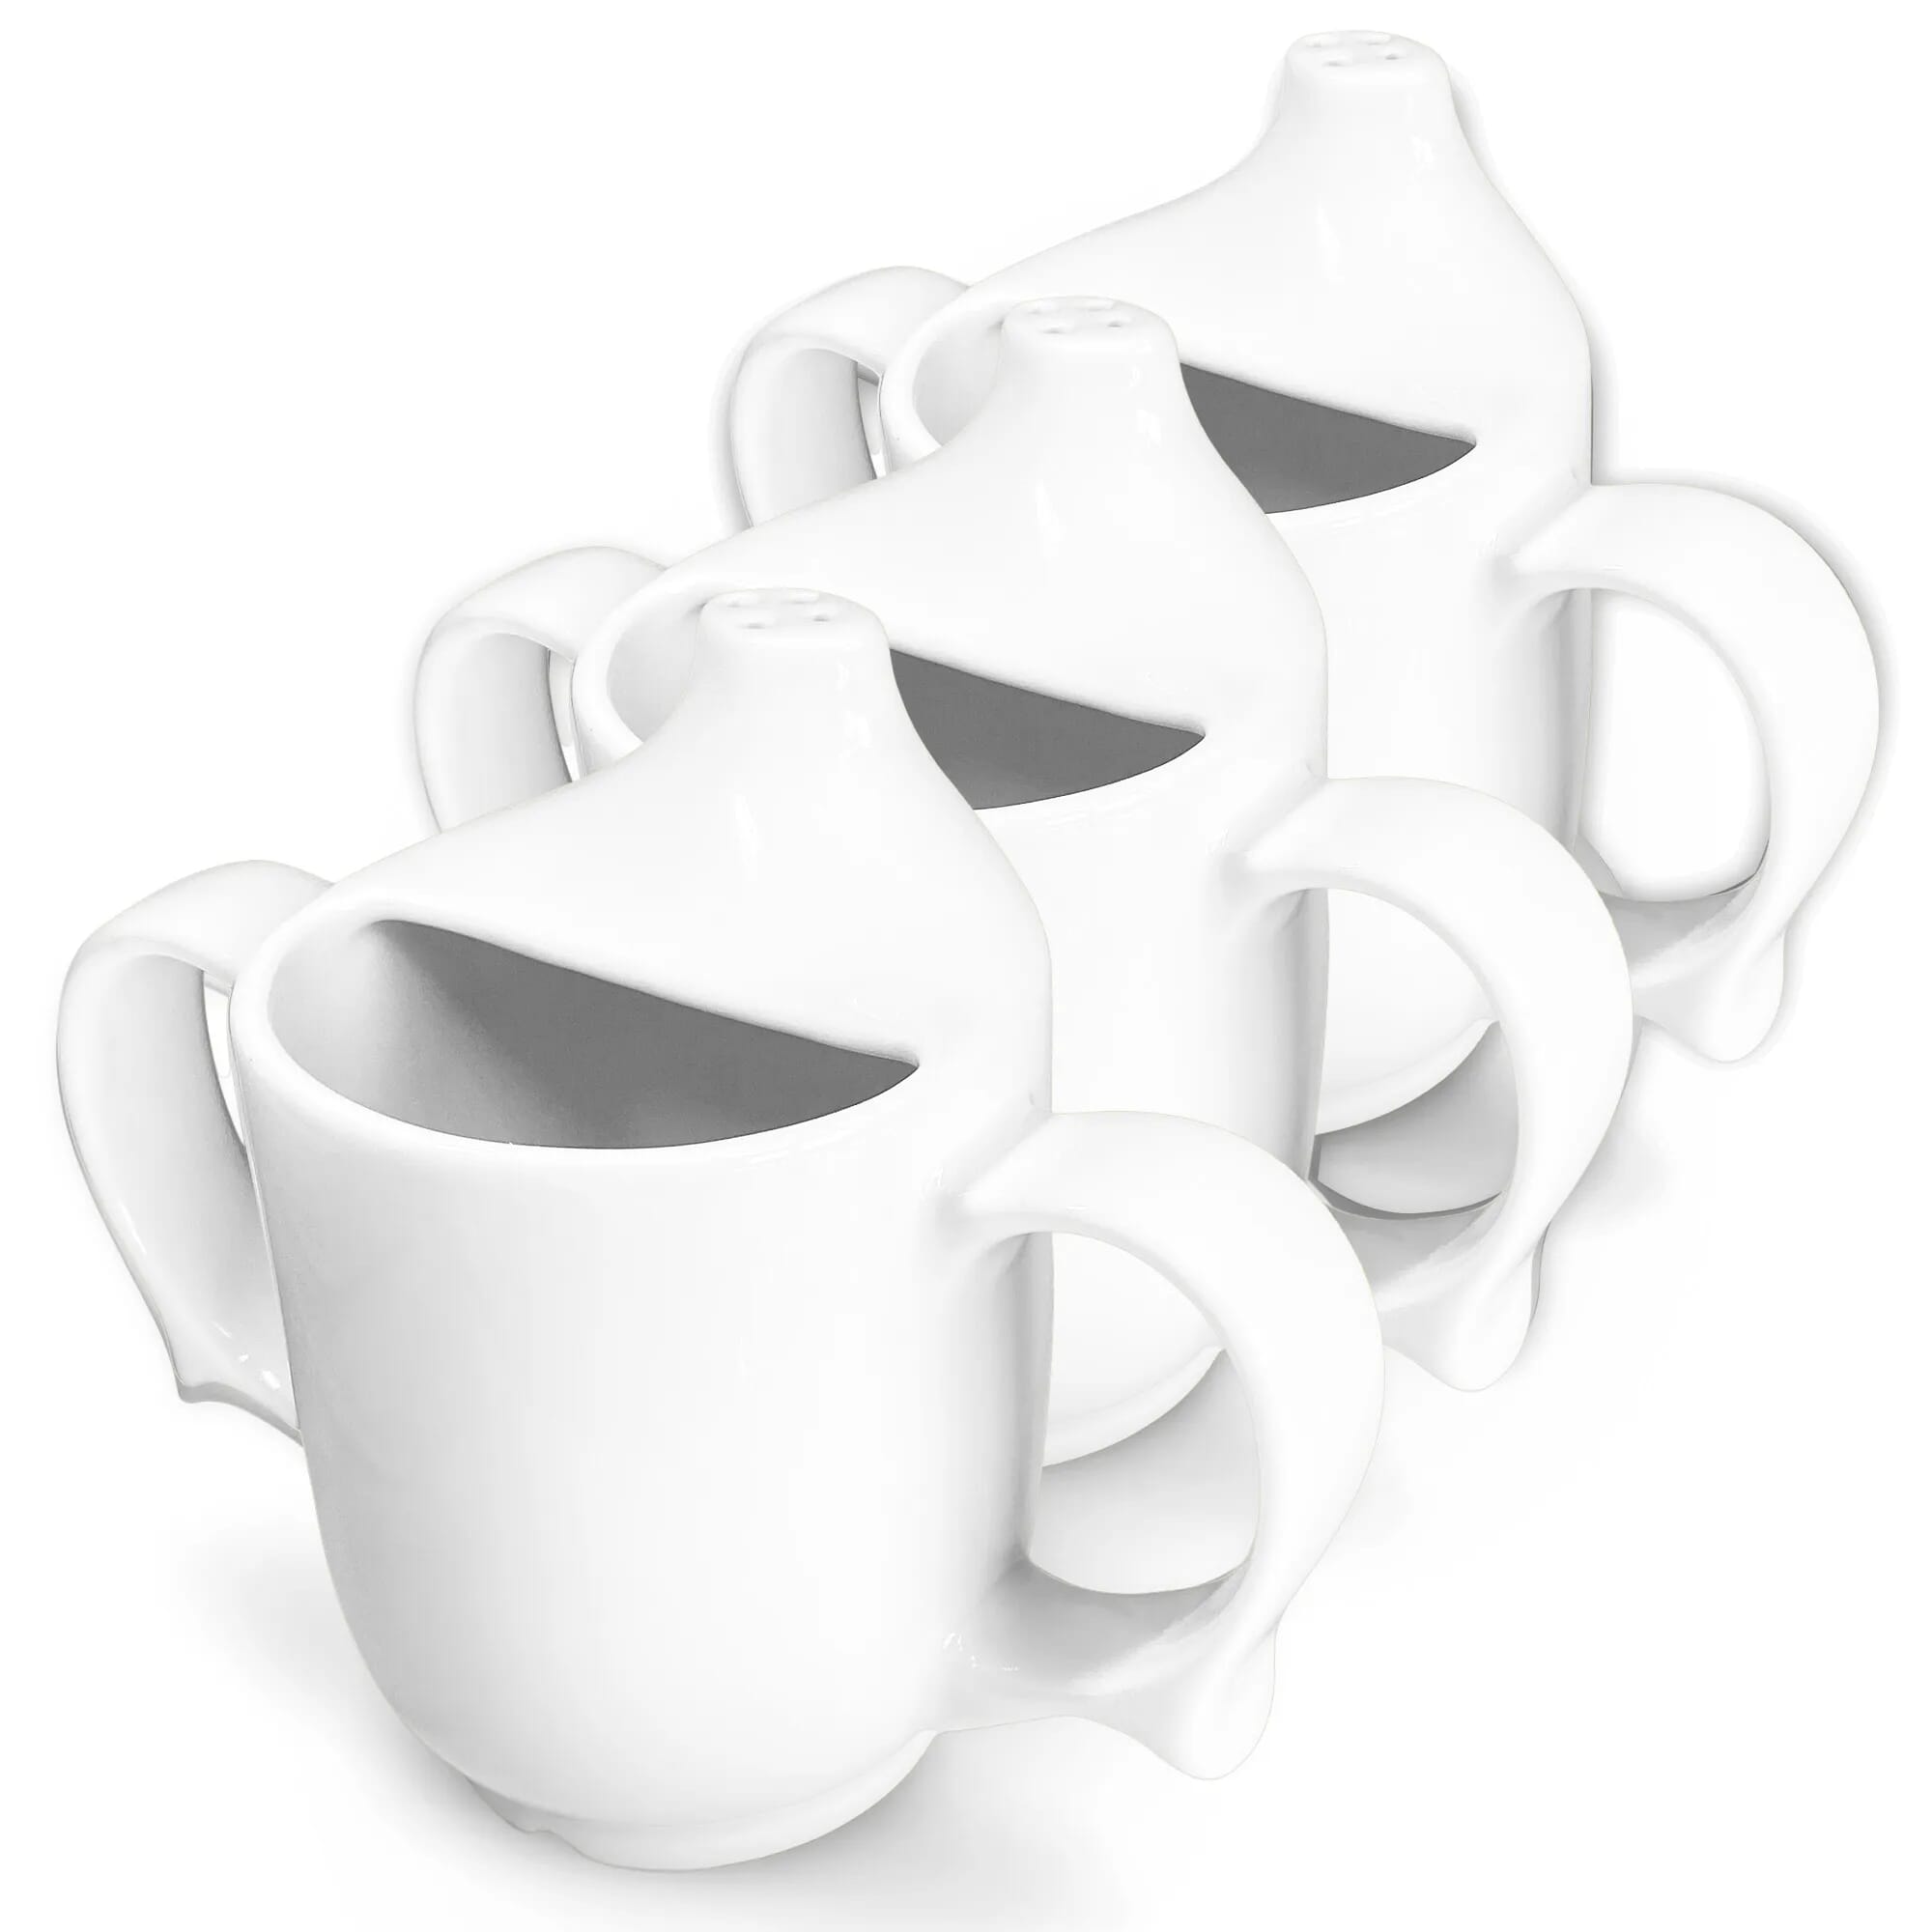 View Tasse 2 anses Wade Dignity Blanc Lot de 3 information